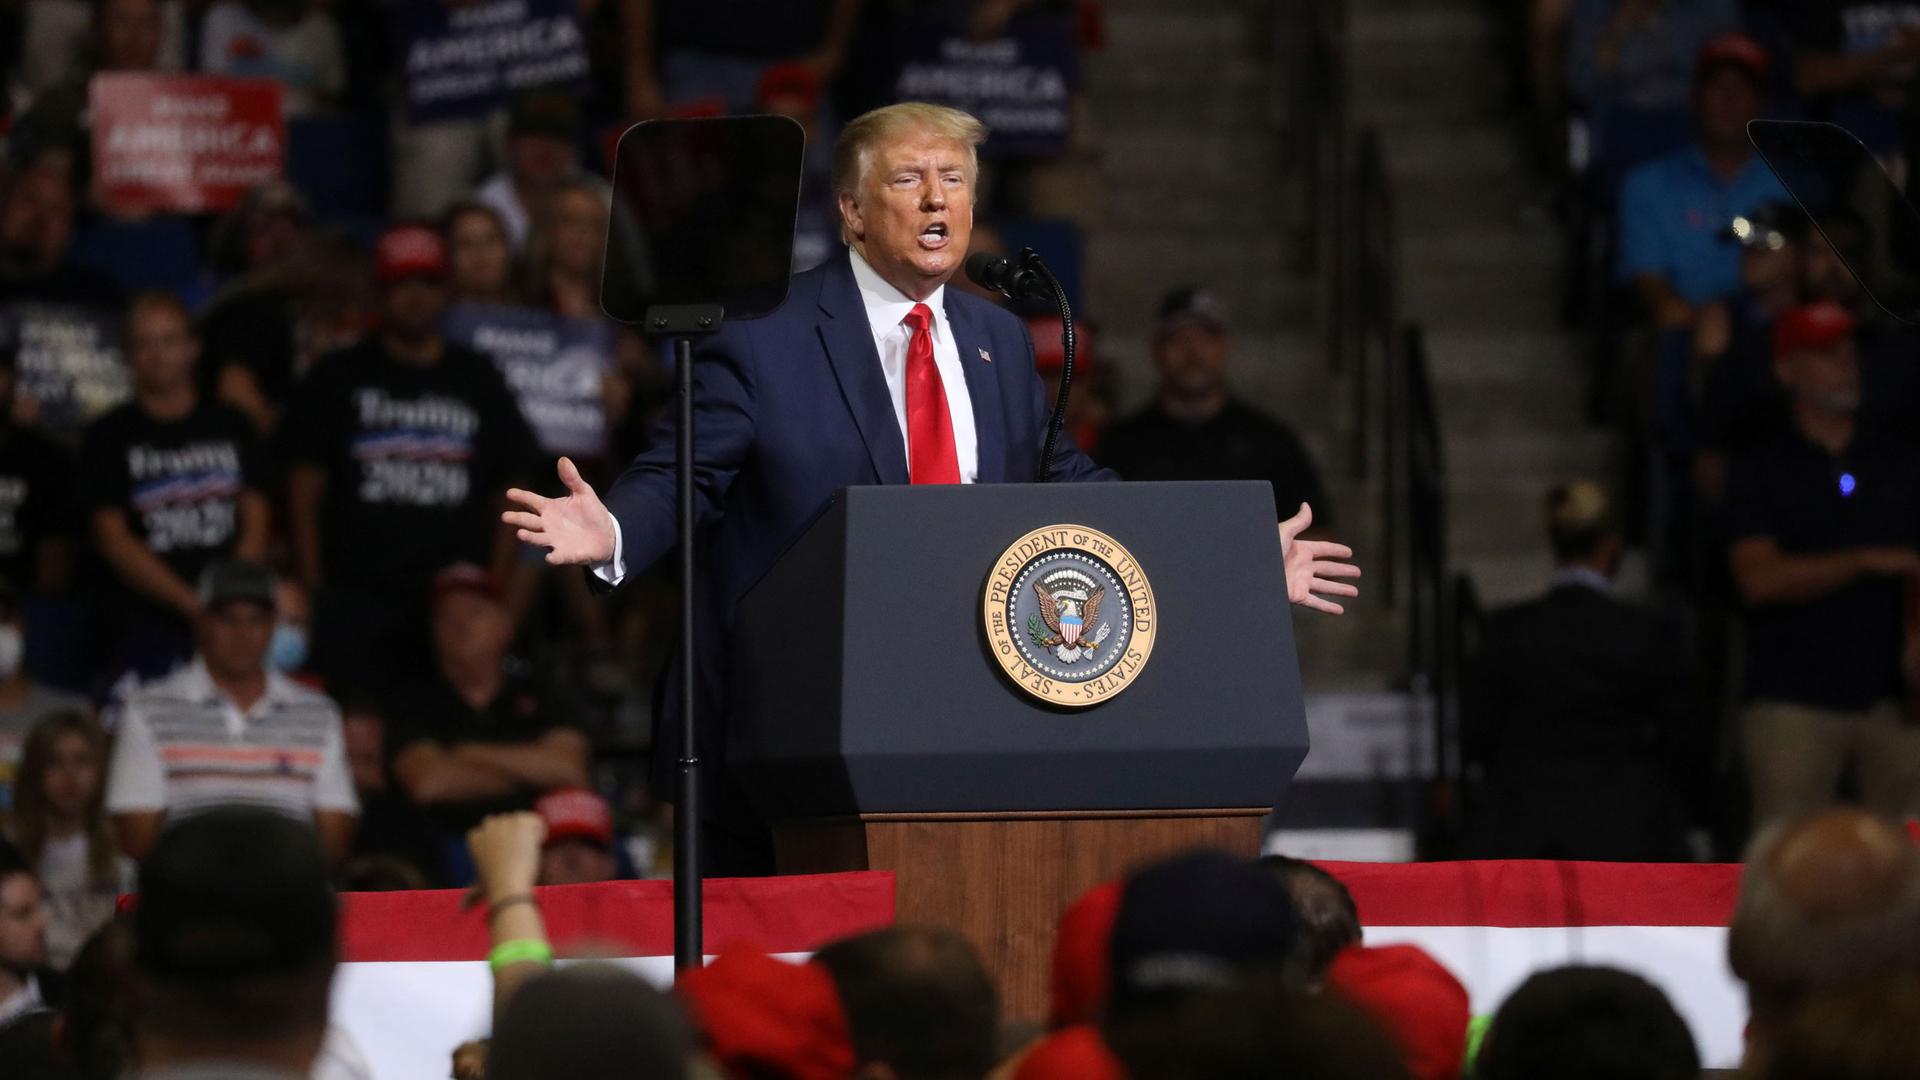 US President Donald Trump is shown standing with his arms outstretched, behind a podium.